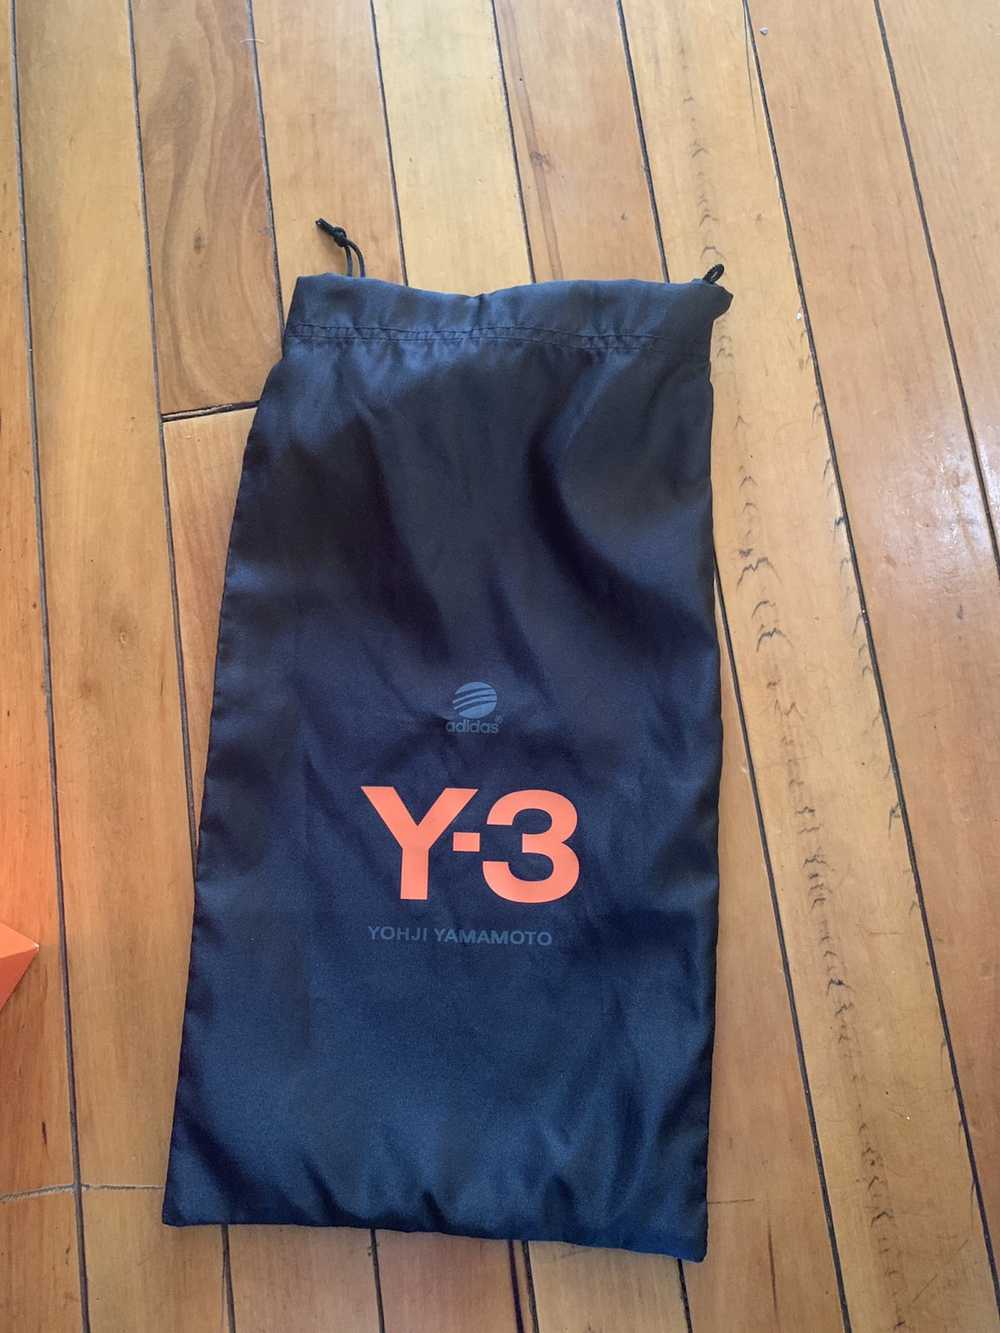 Y-3 Women’s Y-3 Kanja Size Small with Box - image 9